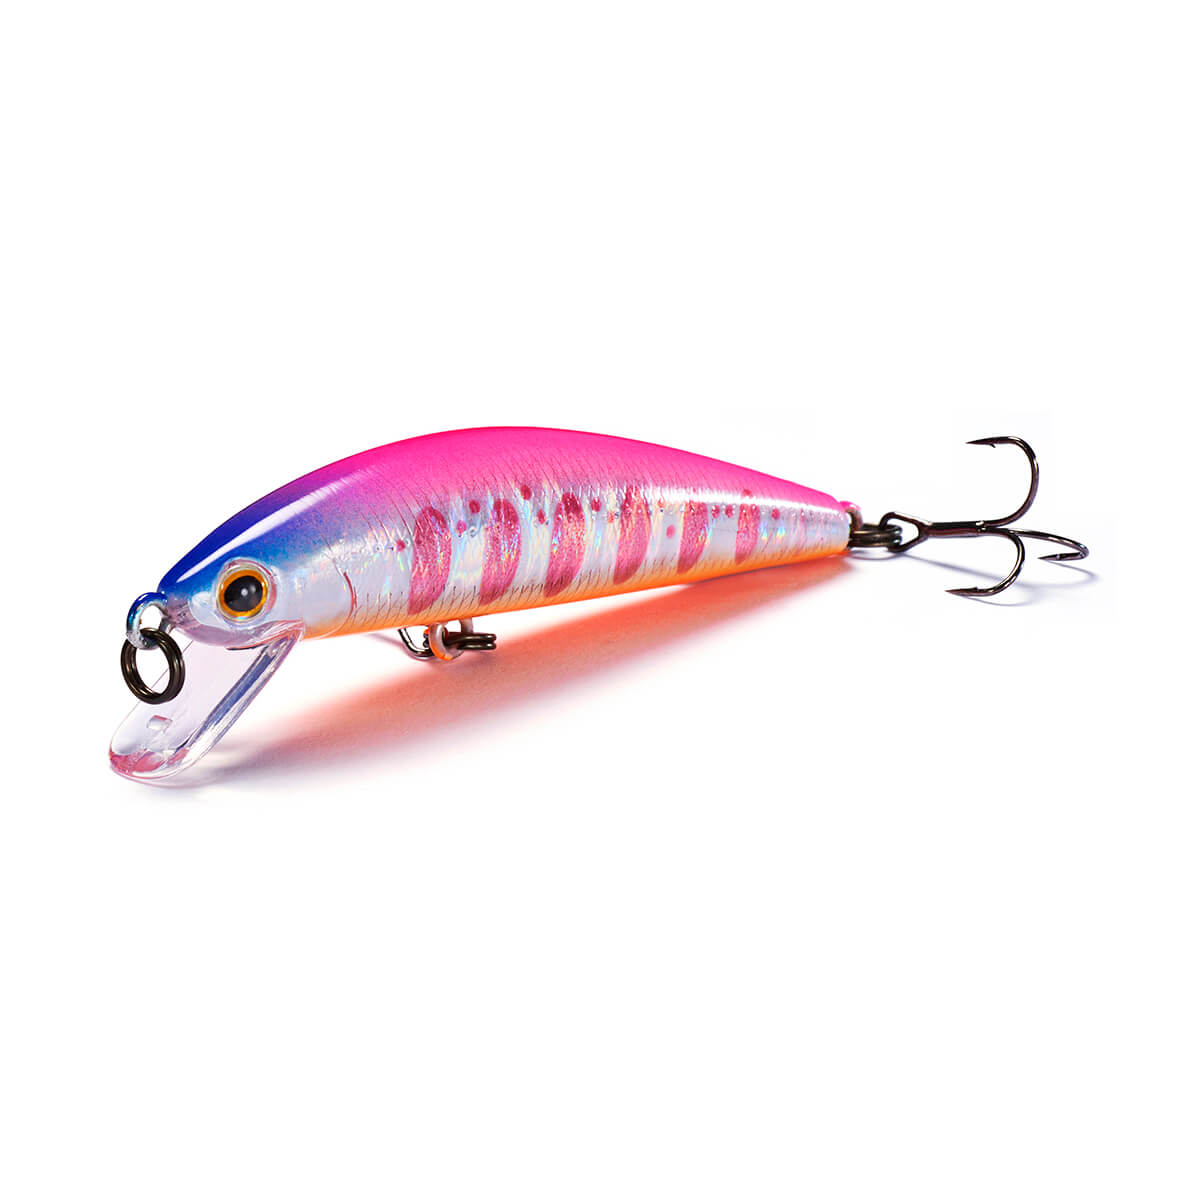 Pack of 10 Hard Minnow Fishing Lures Set Plastic Fishing Hard Baits Set  Topwater Lures Kit Bass Crankbait Swimbaits for Pikes Trout Walleye Redfish